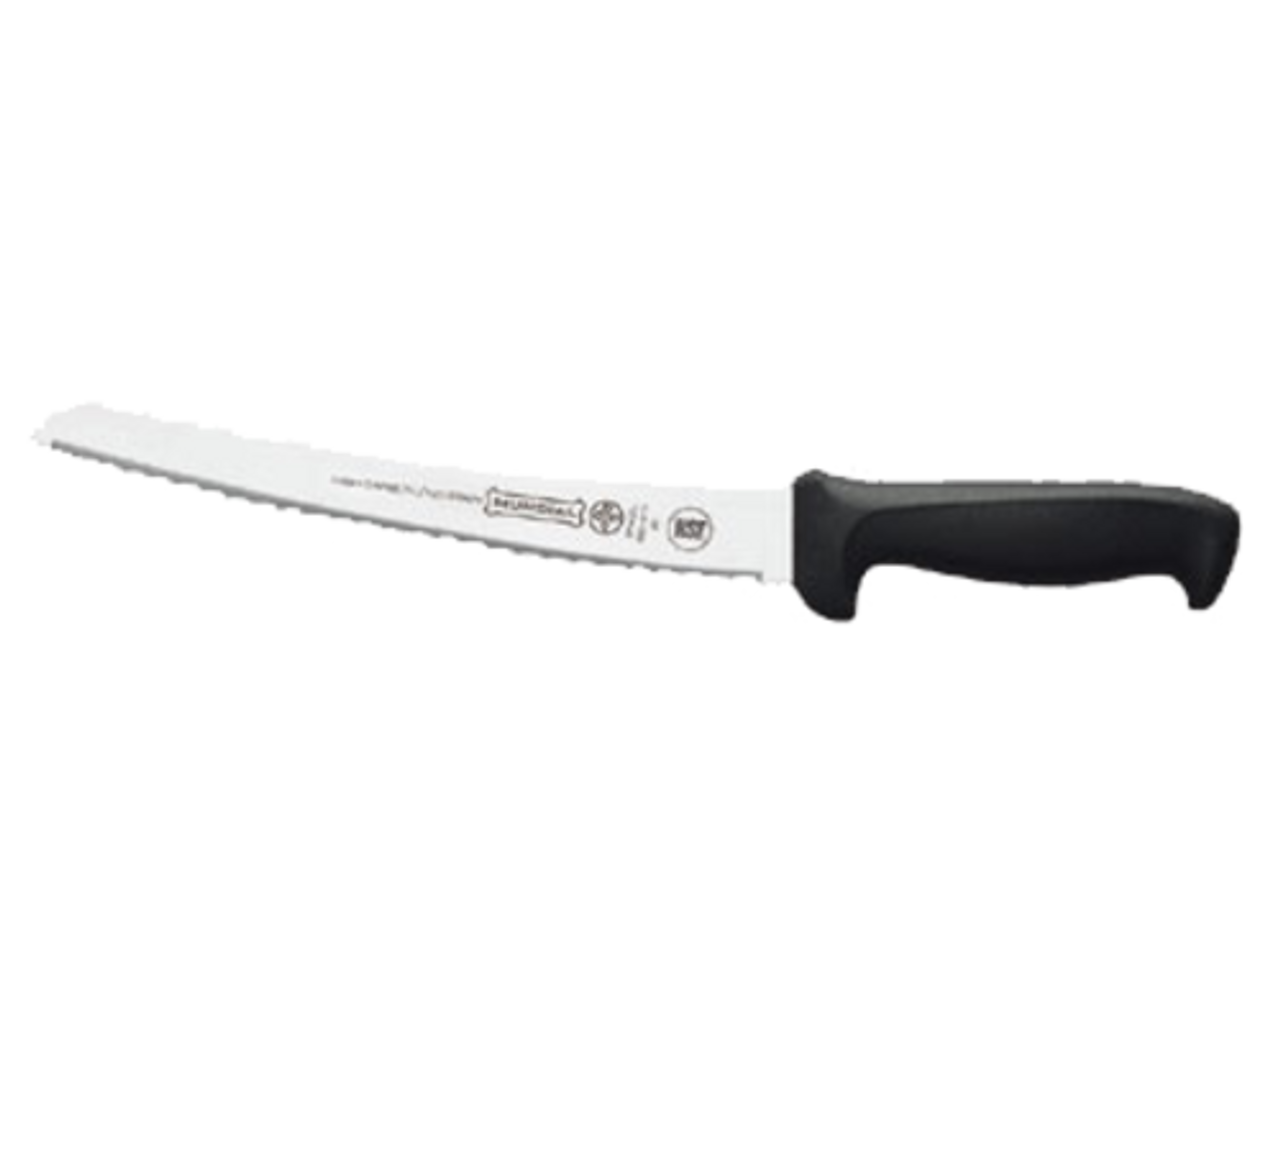 Bread Knife, 10", curved, micro-serra edge, high carbon/no stain blade, molded black polypropylene handle, treated with sanitized antimicrobial protection (snap), NSF